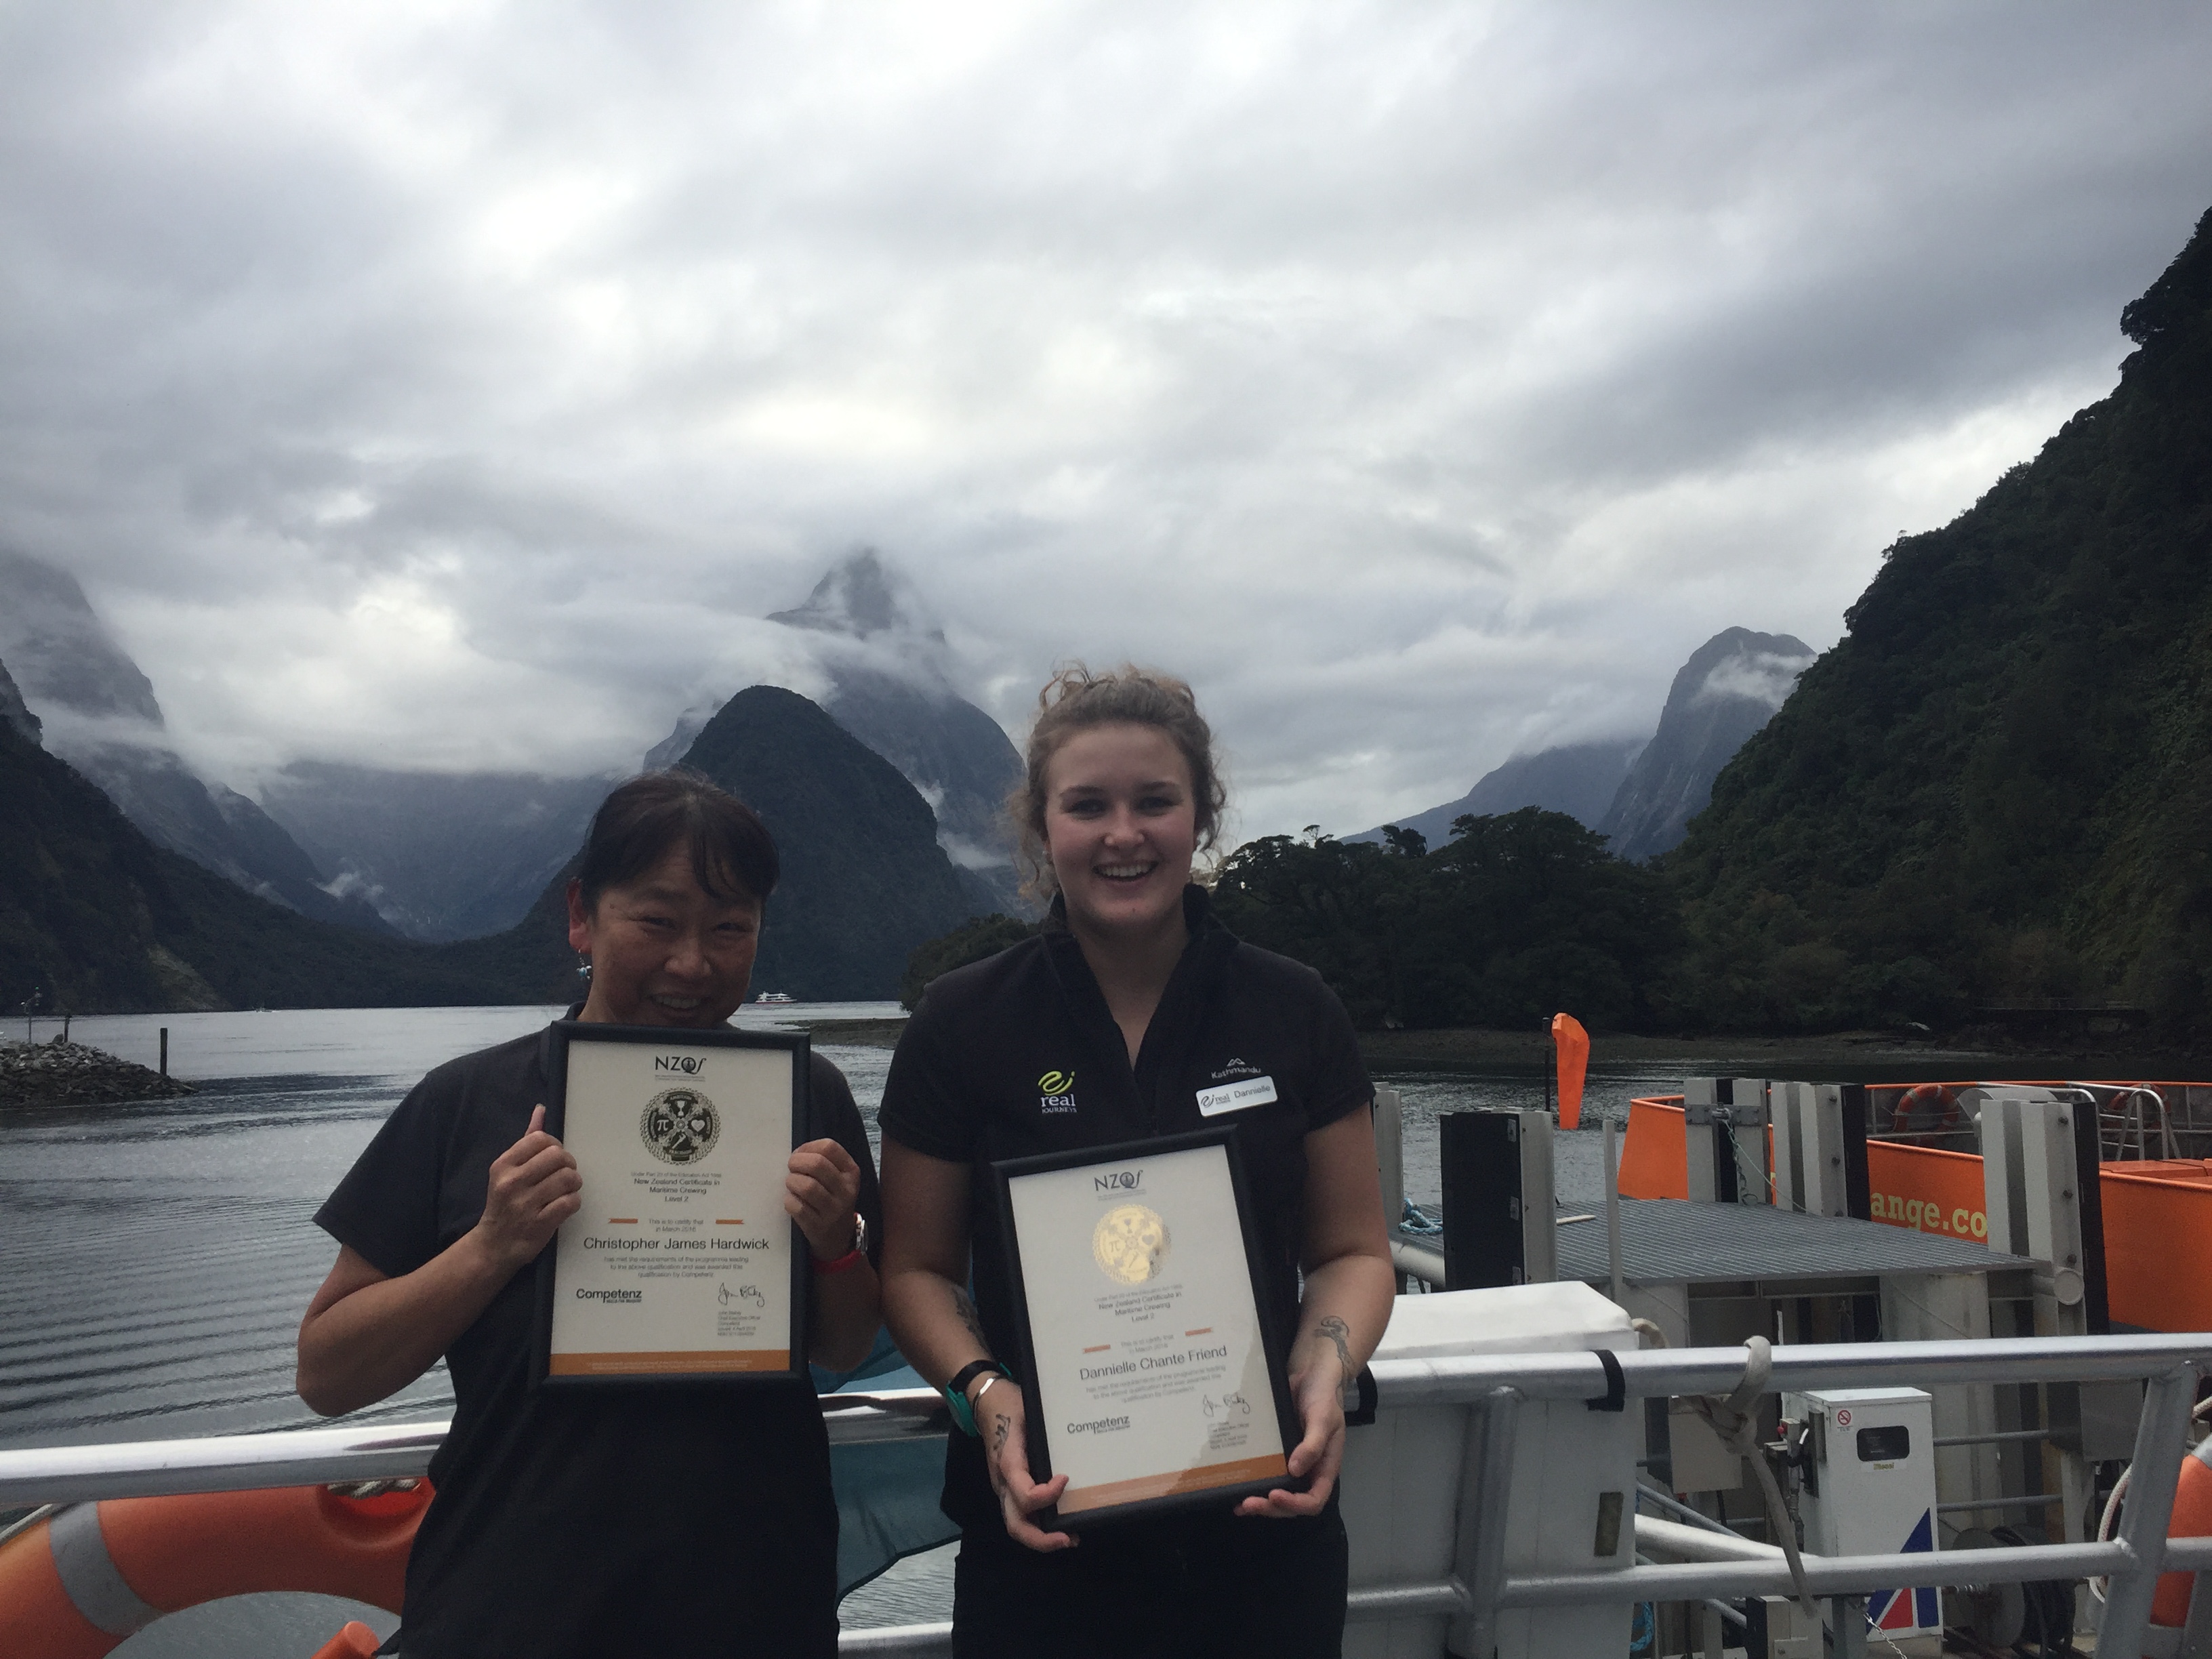 Two Real Journeys staff members holding awards in Milford Sound